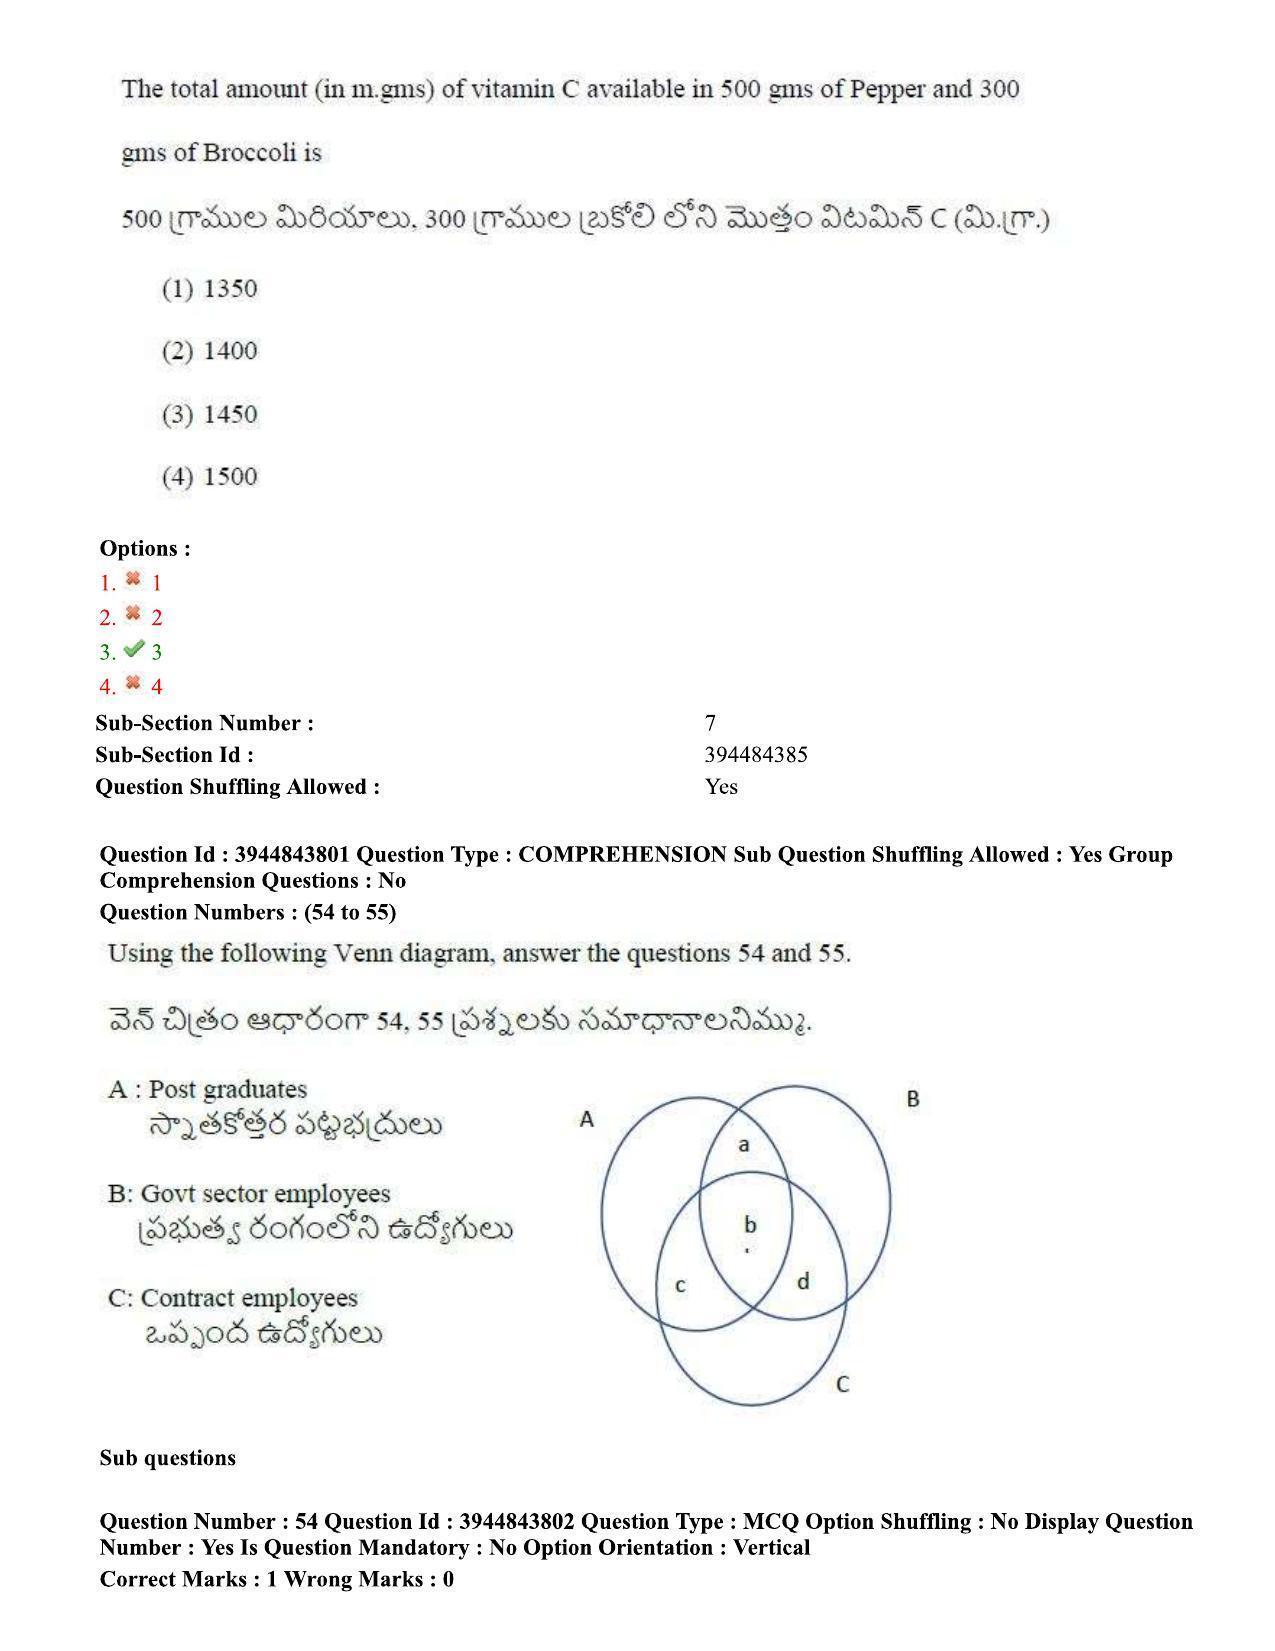 TS ICET 2020 Question Paper 1 - Oct 1, 2020	 - Page 40